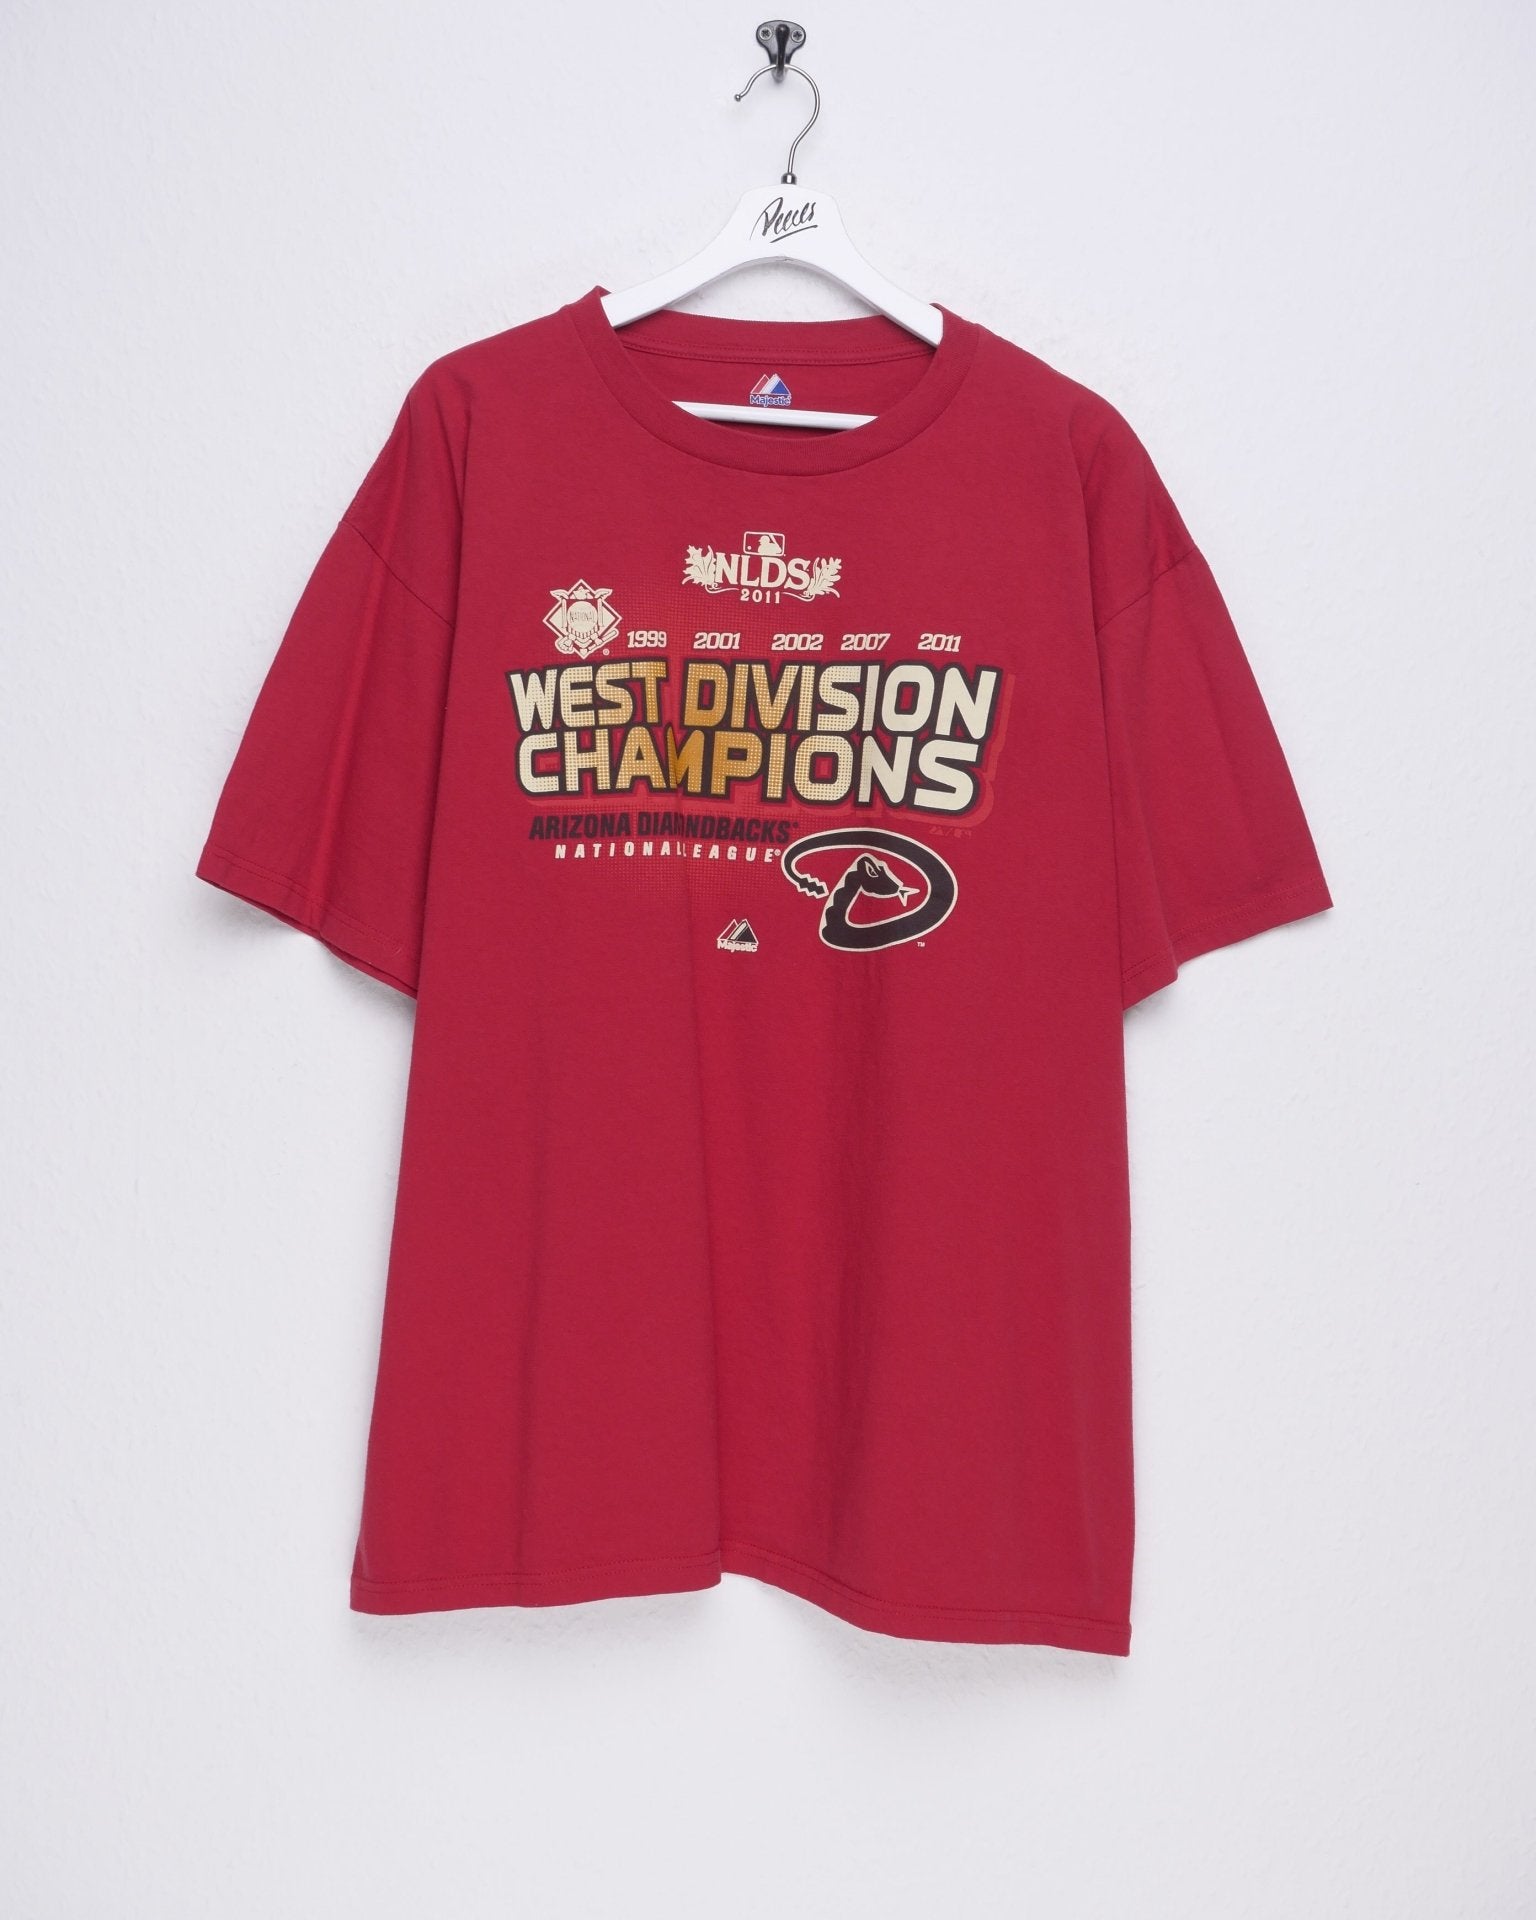 NLDS 2011 West Division Champions printed Graphic red Shirt - Peeces